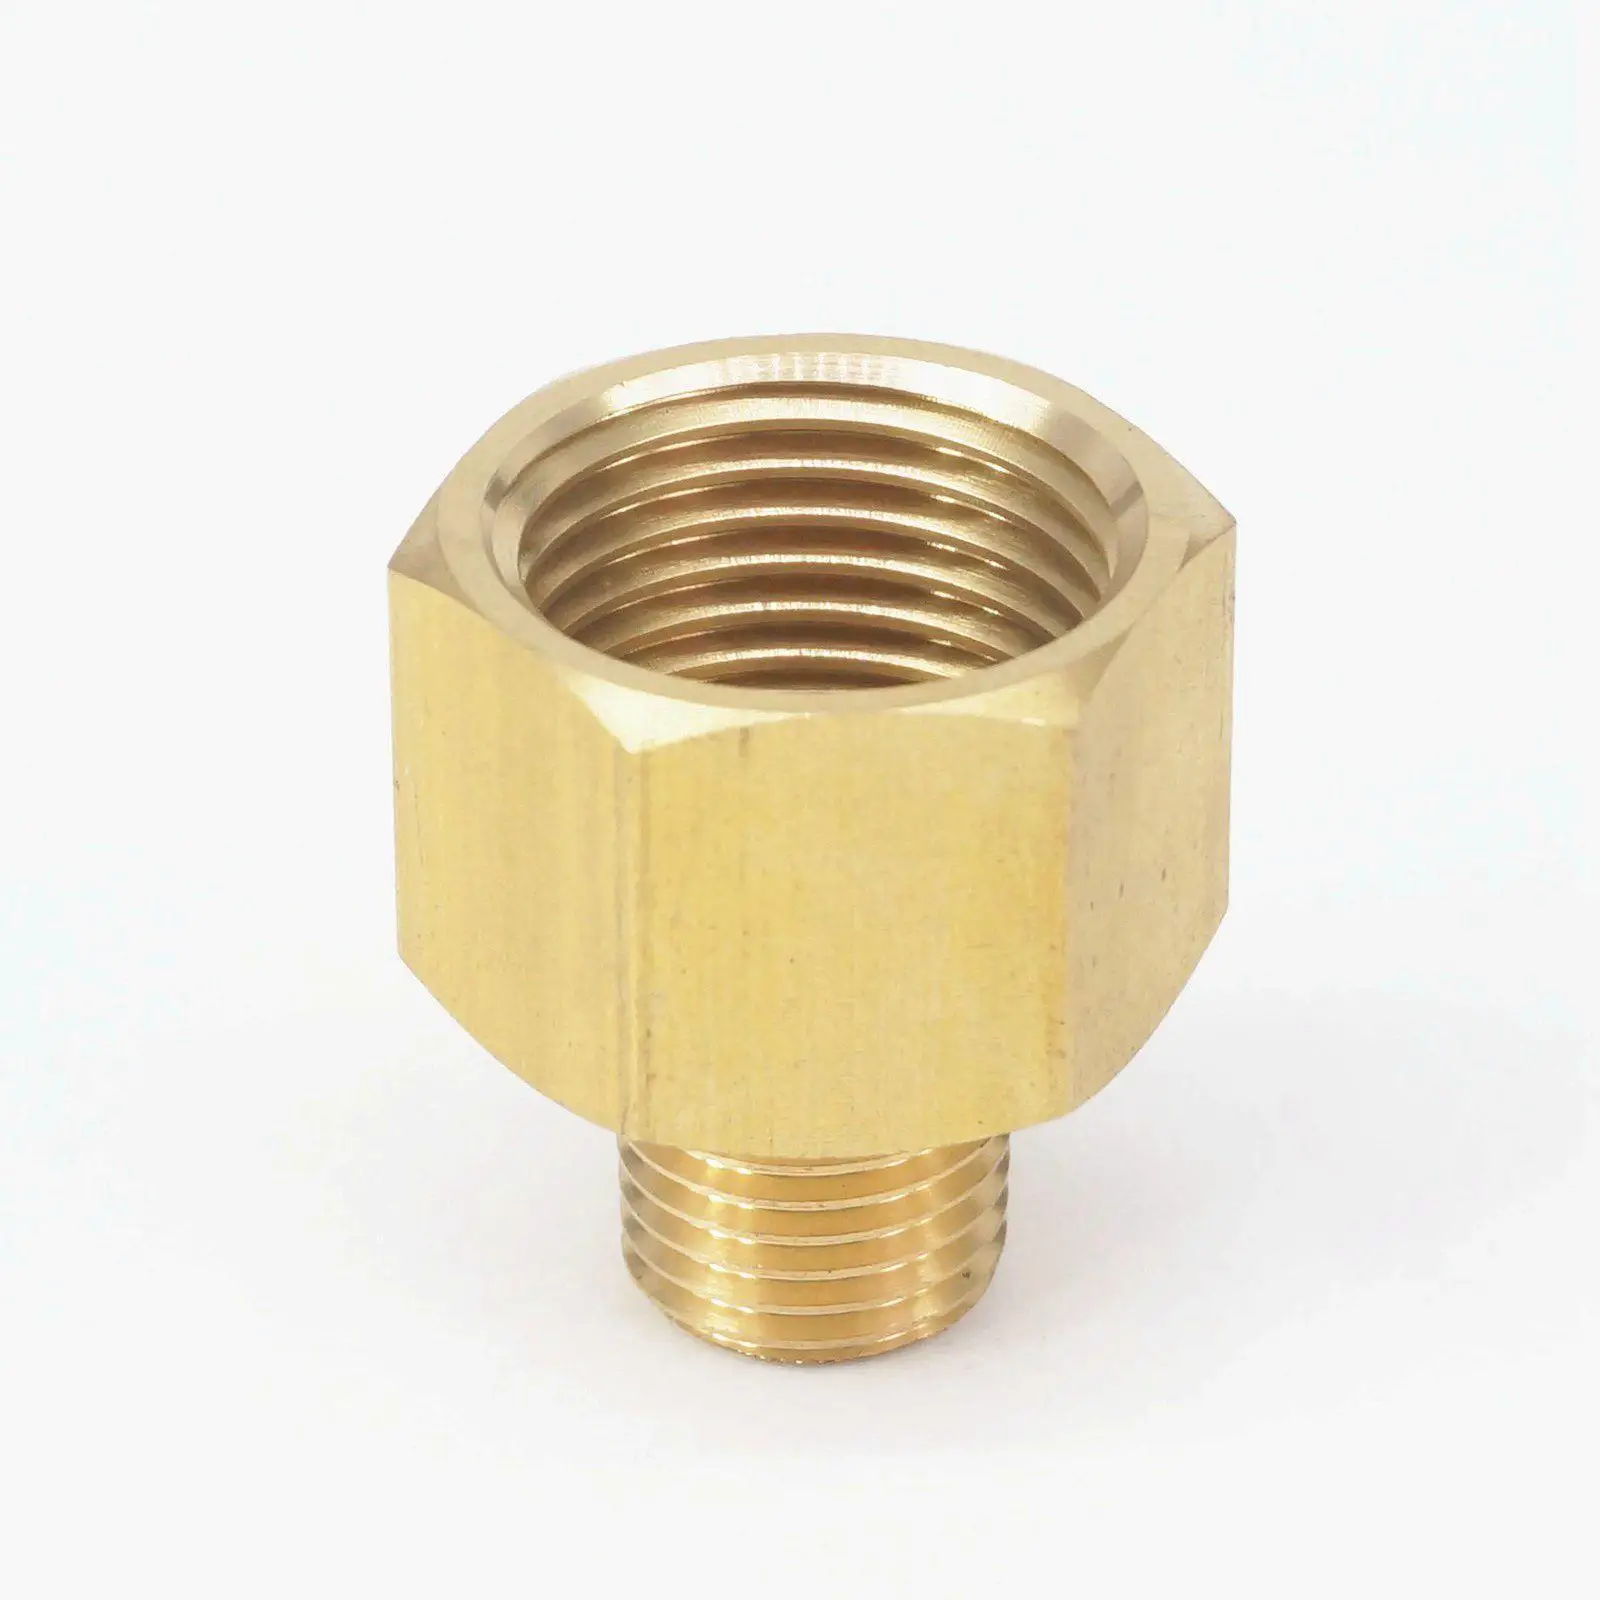 Clutch AG 40x1 1/4" Brass Pe Fitting Tube DVGW Water Fitting Connect 